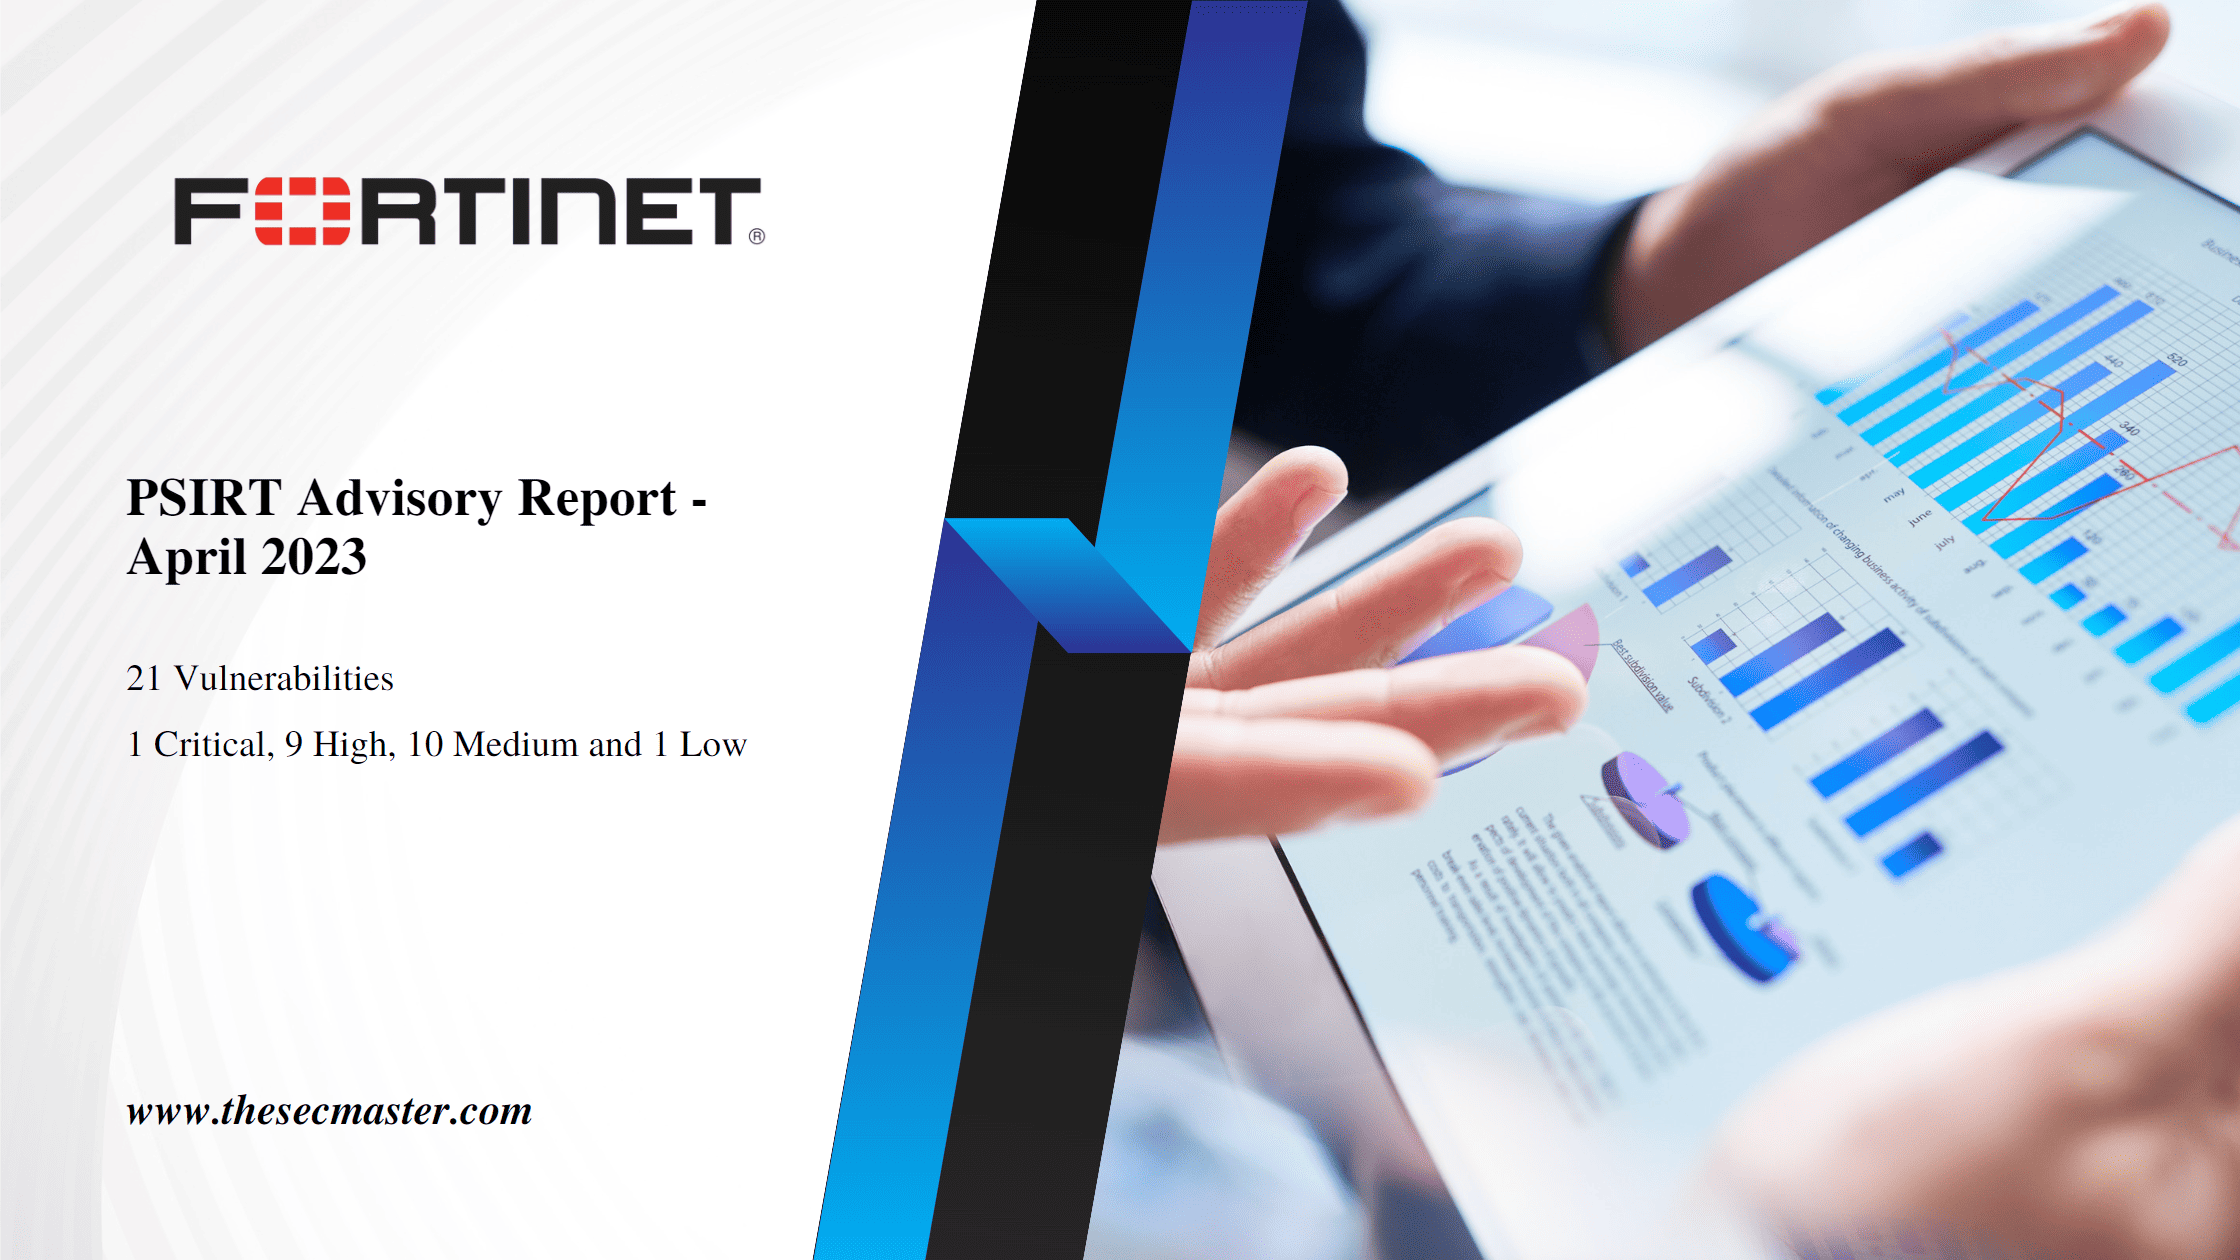 Breaking Down The Latest April 2023 Monthly Psirt Advisory Report From Fortinet